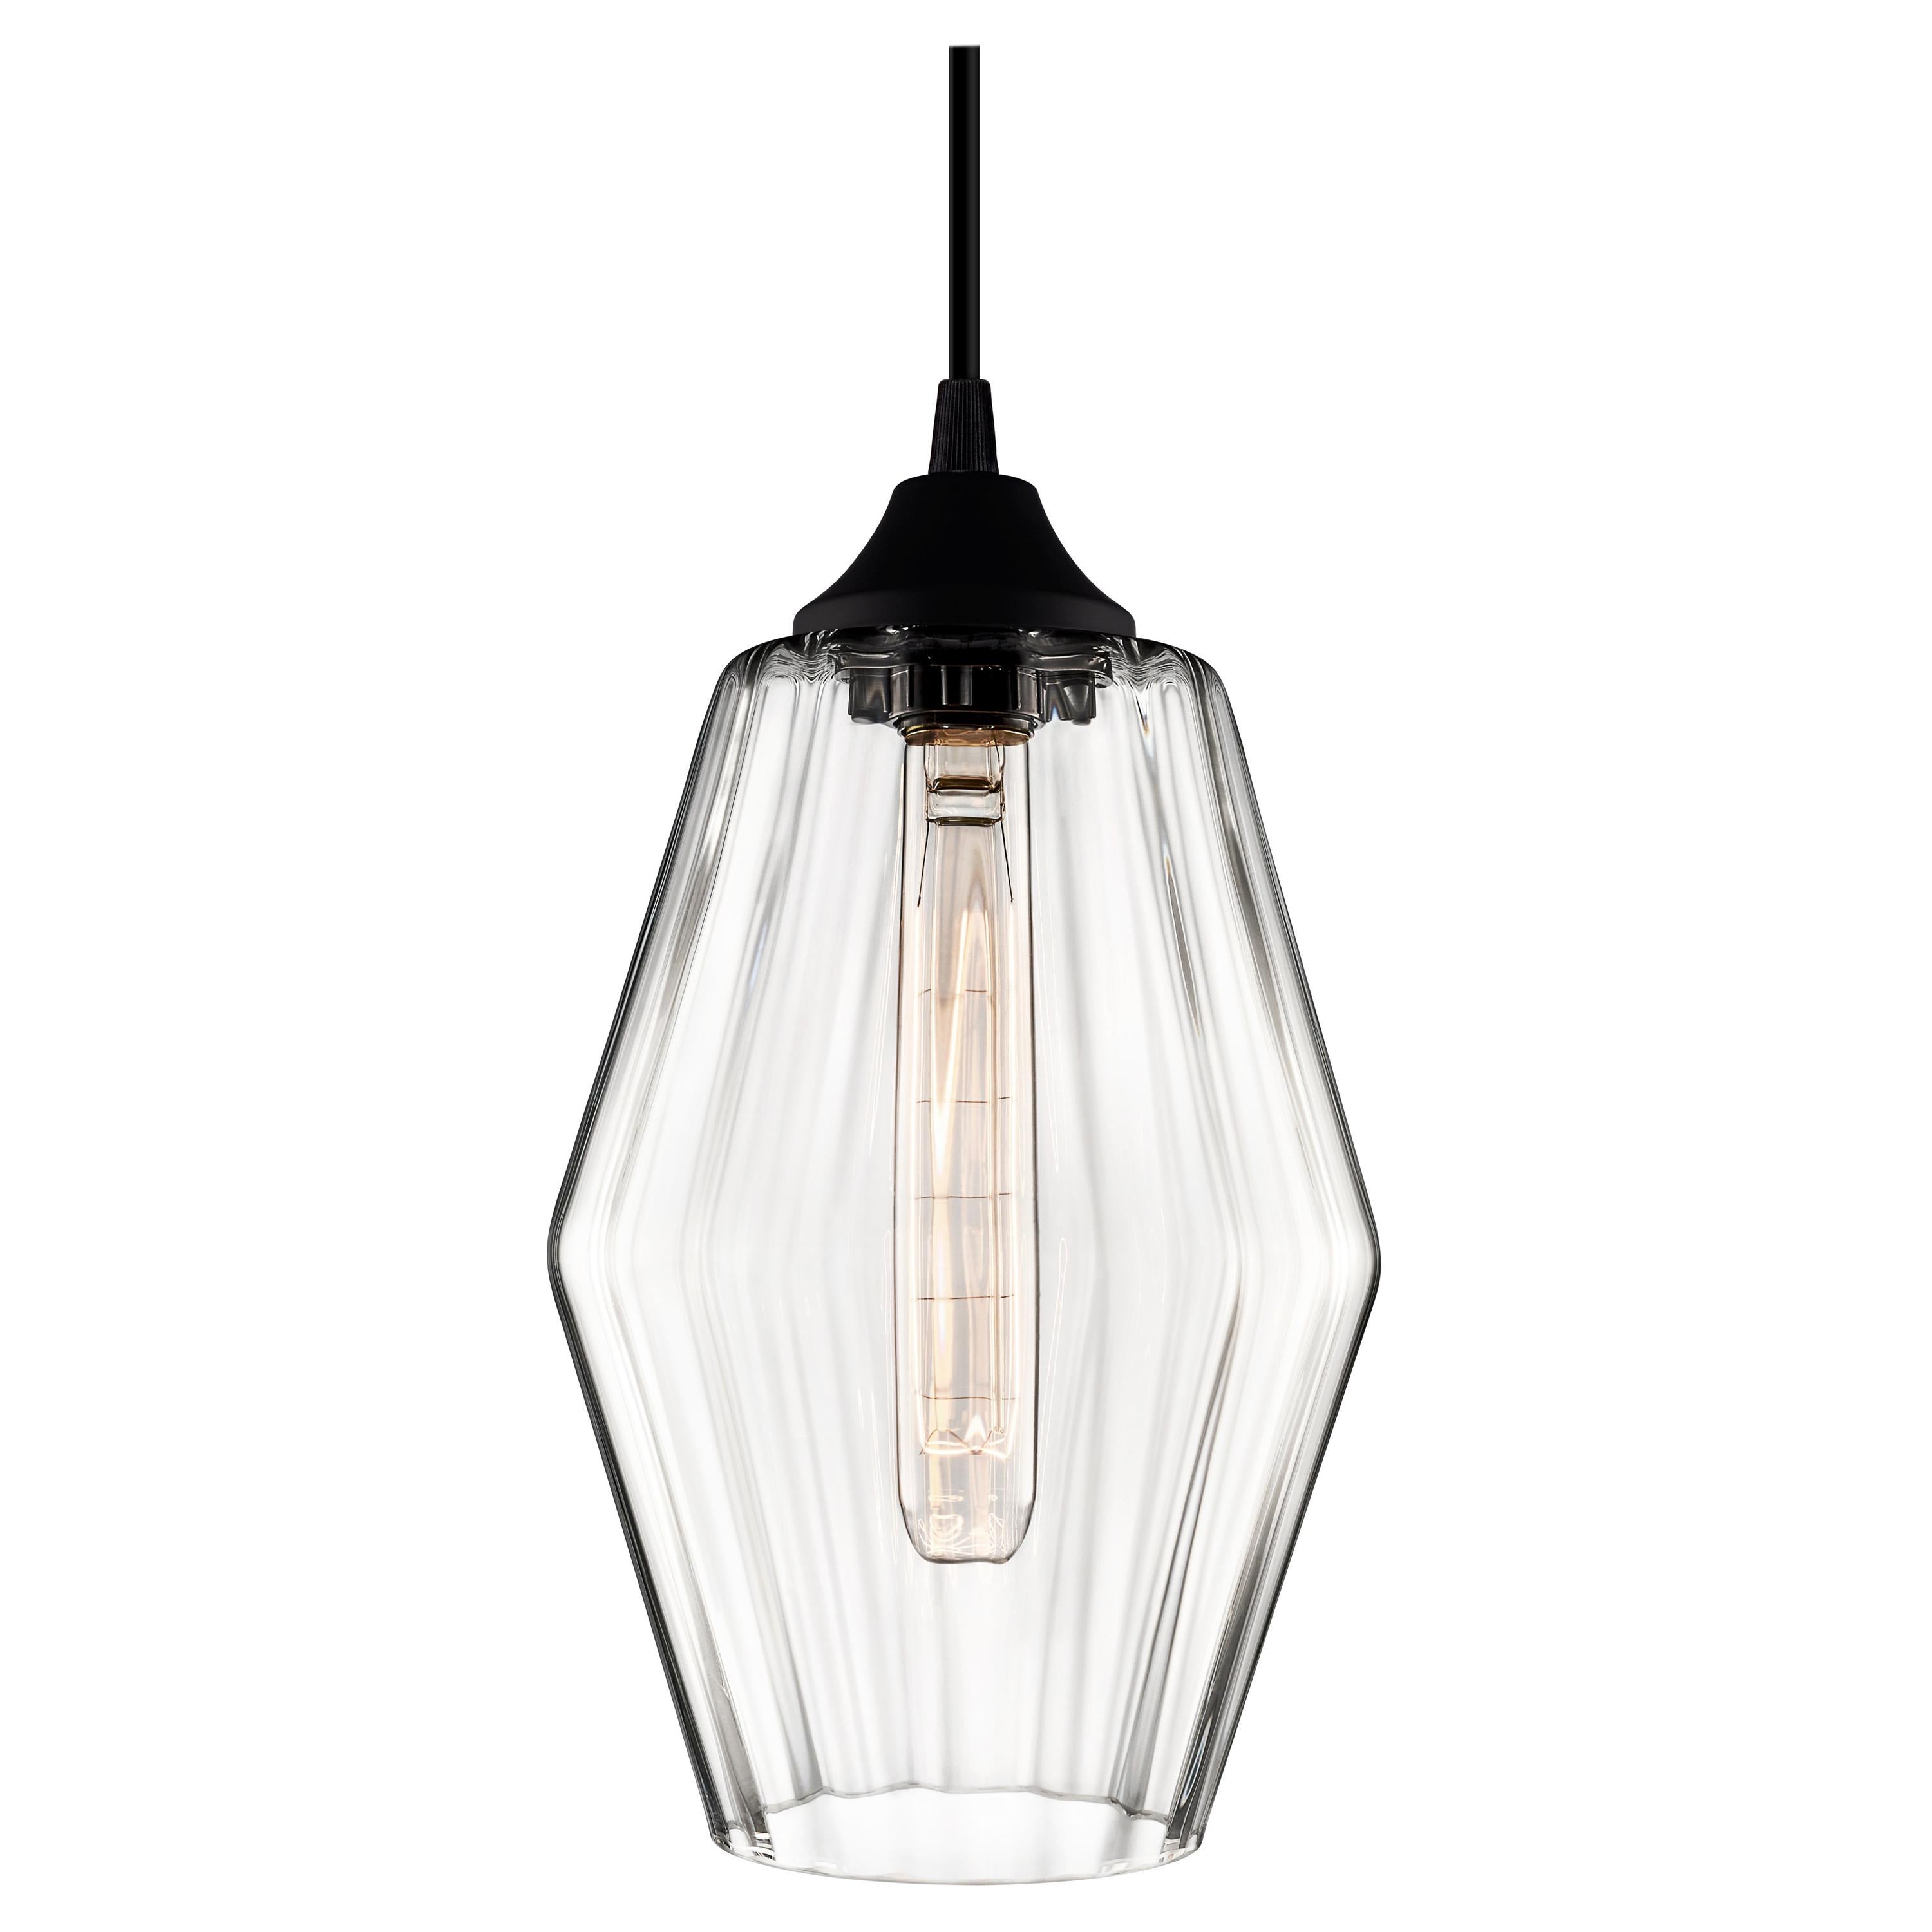 Marquise Petite Crystal Optique Handblown Modern Glass Pendant Light, Made in US